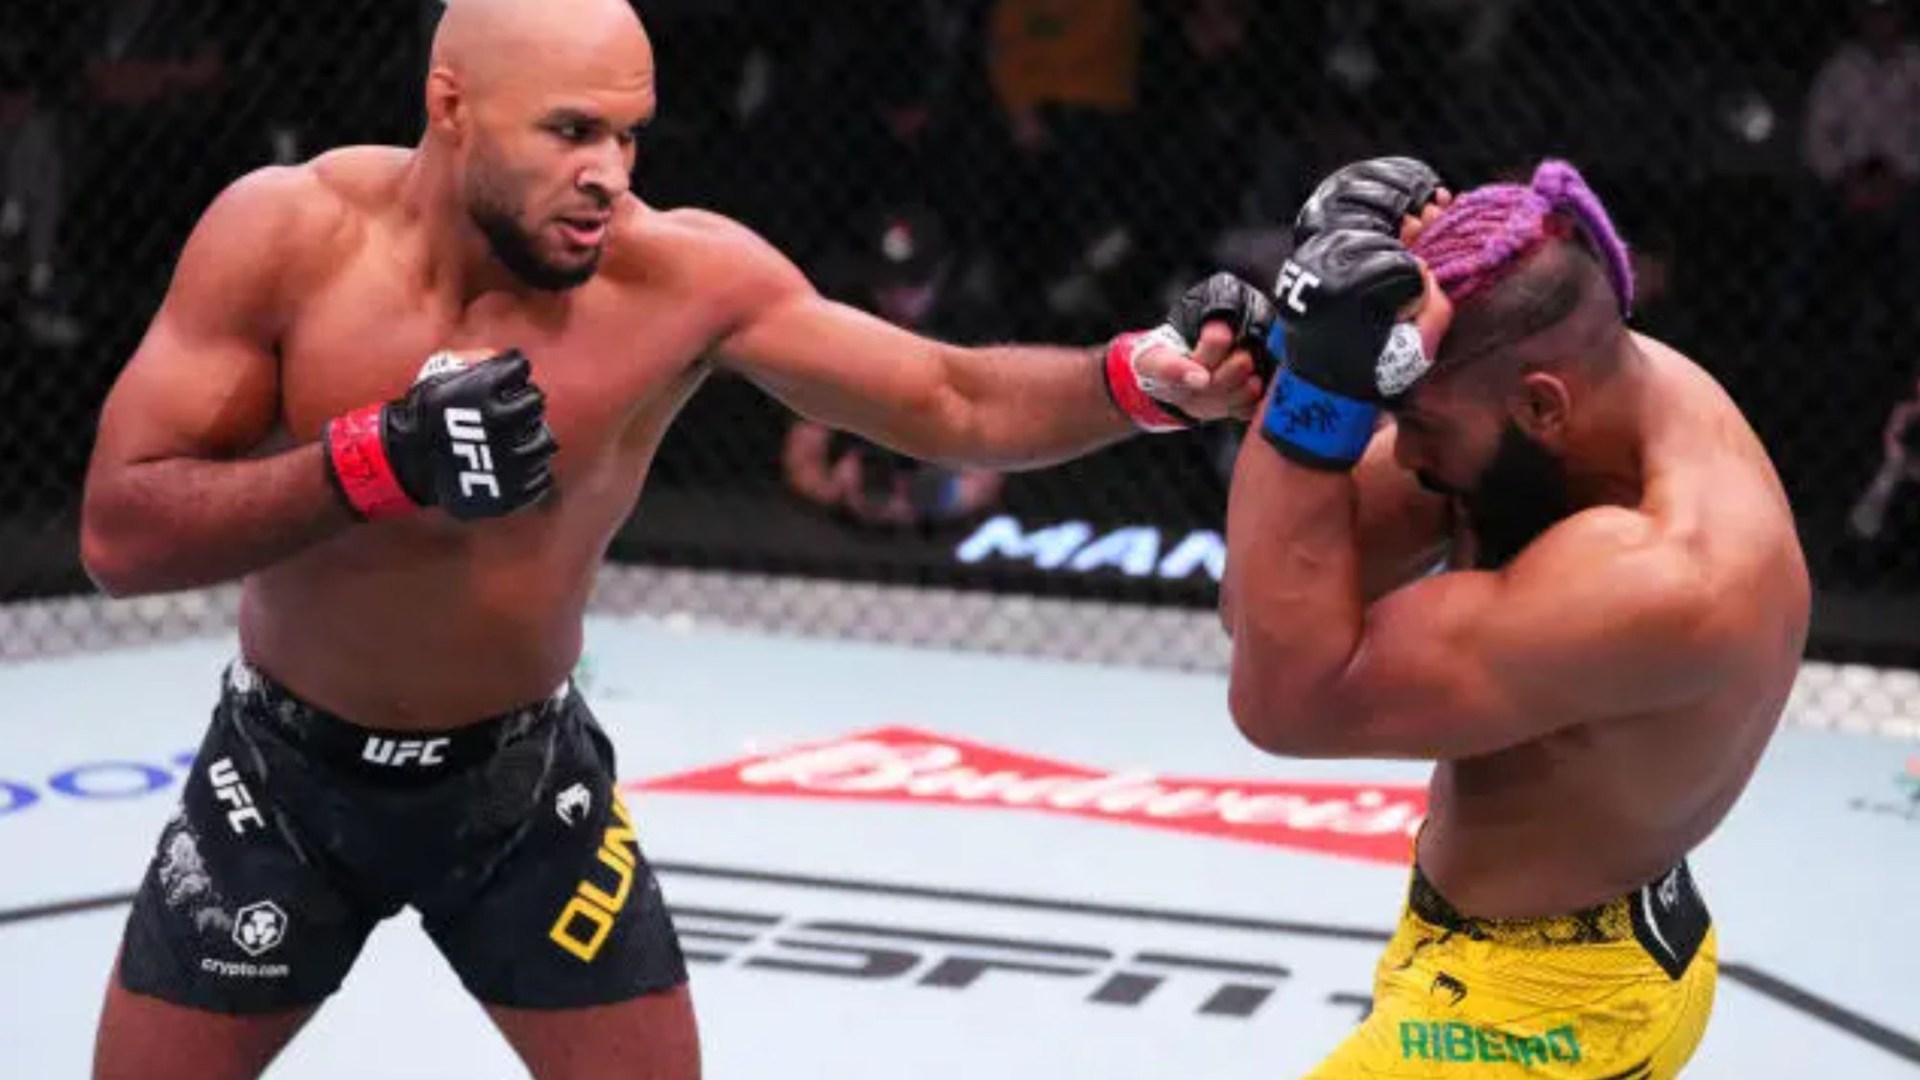 UFC 304: Christian Leroy Duncan to face Robert Bryczek on stacked Manchester card headlined by Leon Edwards [Video]